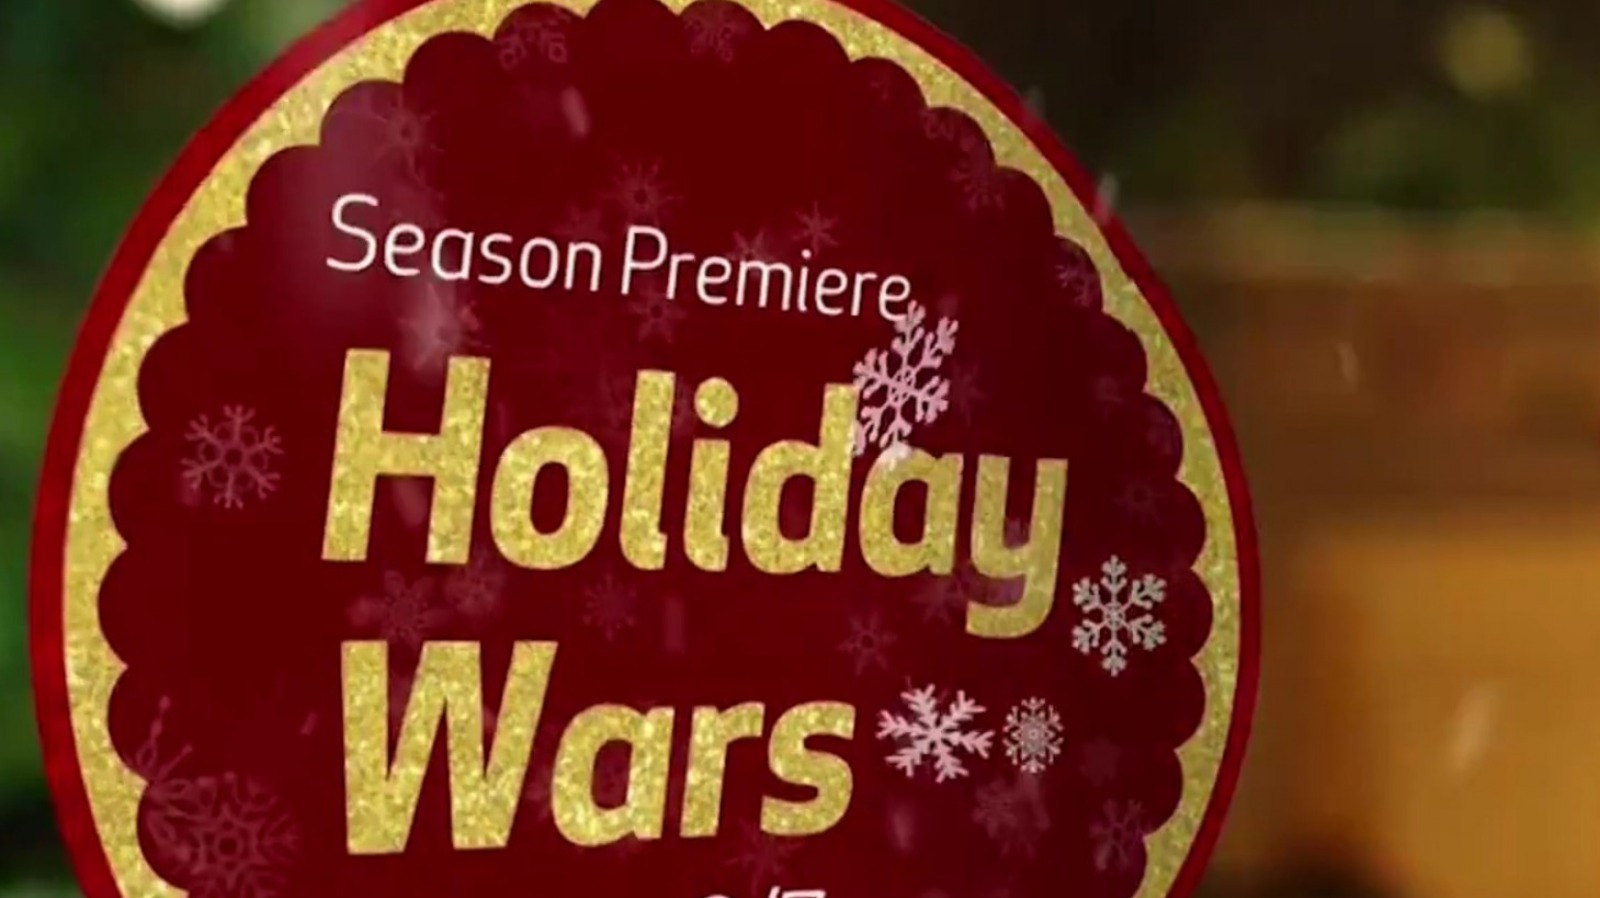 Holiday Wars Season 3 Release Date, Judges, And More What We Know So Far